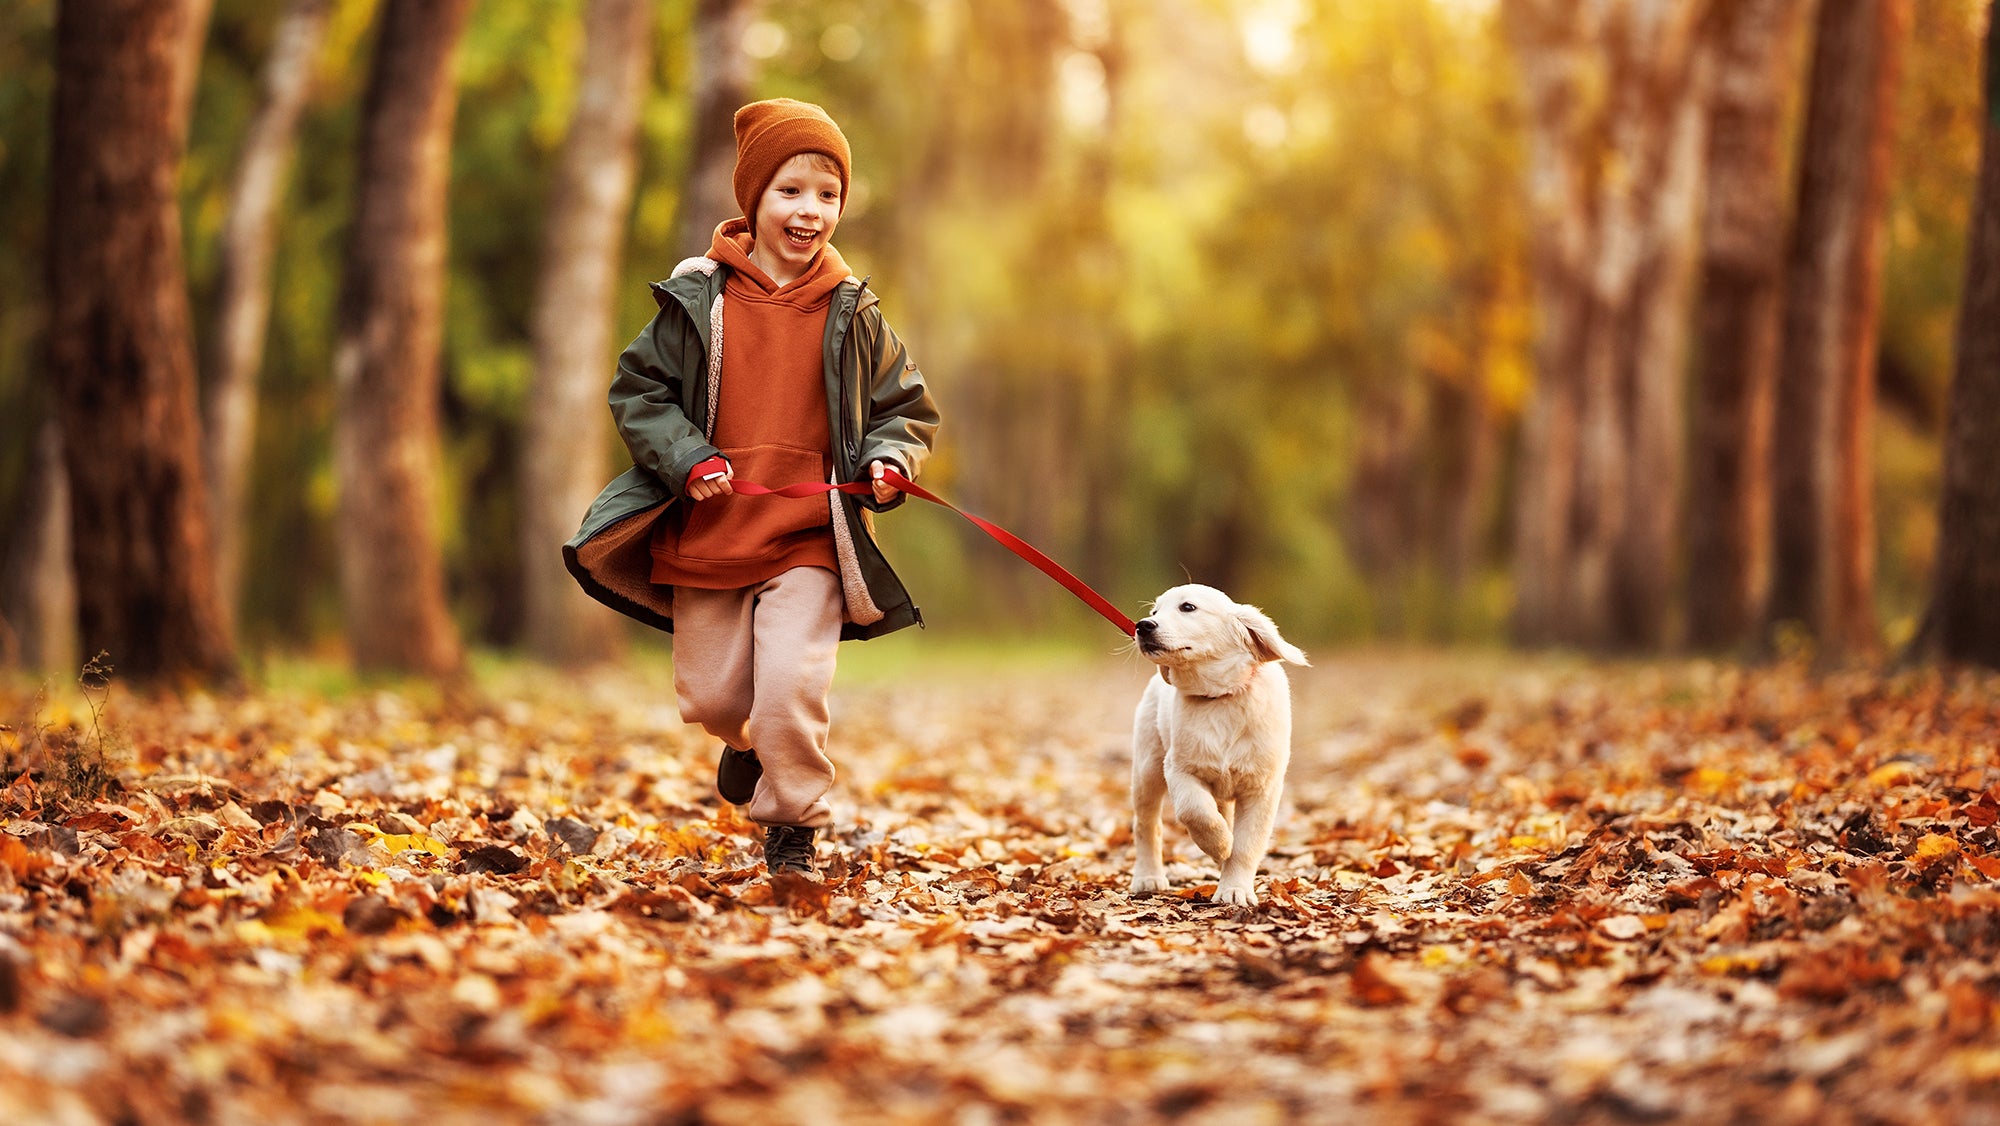 Young boy showng running down a leaf covered path in the forest with his cream colored labrador retriever puppy on his left hand side.  He is very happy and enjoying his environment.  Purra technology is completely safe to the environment, people and pets.